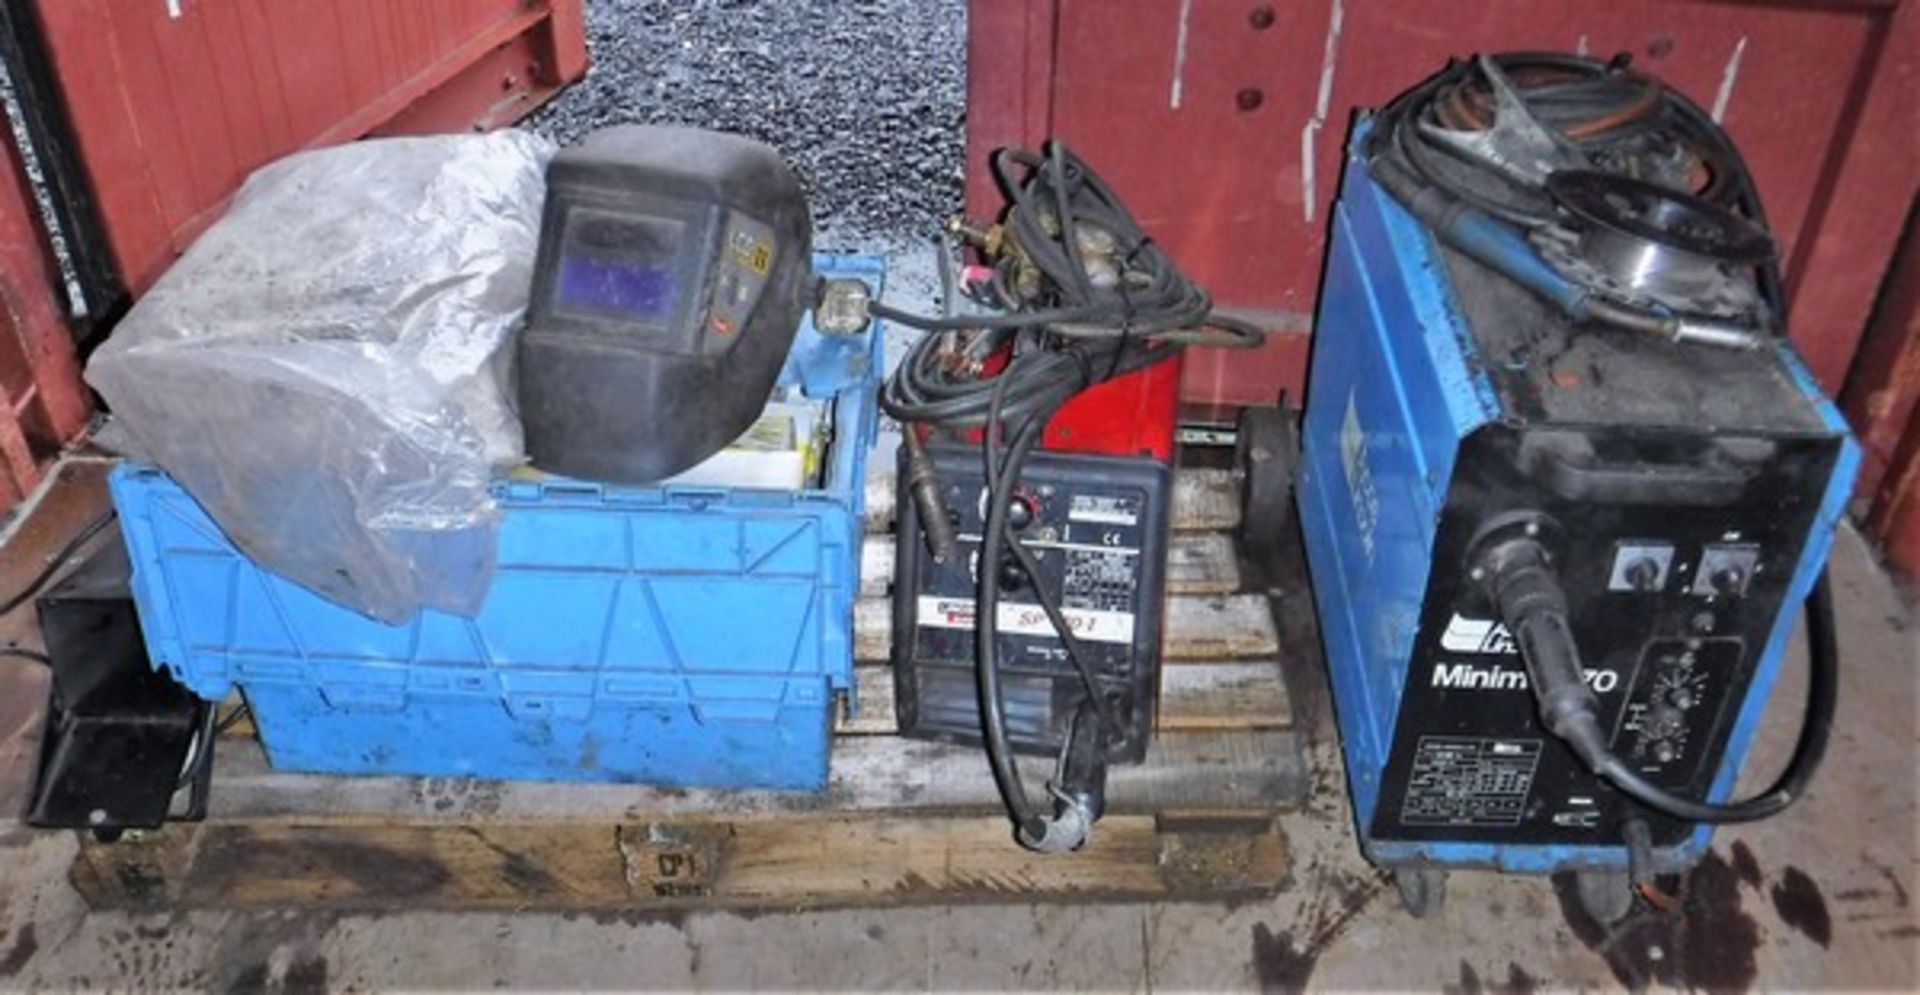 LINCOLN ELECTRIC 240V SP170-I MIG WELDER C/W CABLES, TORCH & WIRE, PALLET OF APPROX 100KG WELDING RO